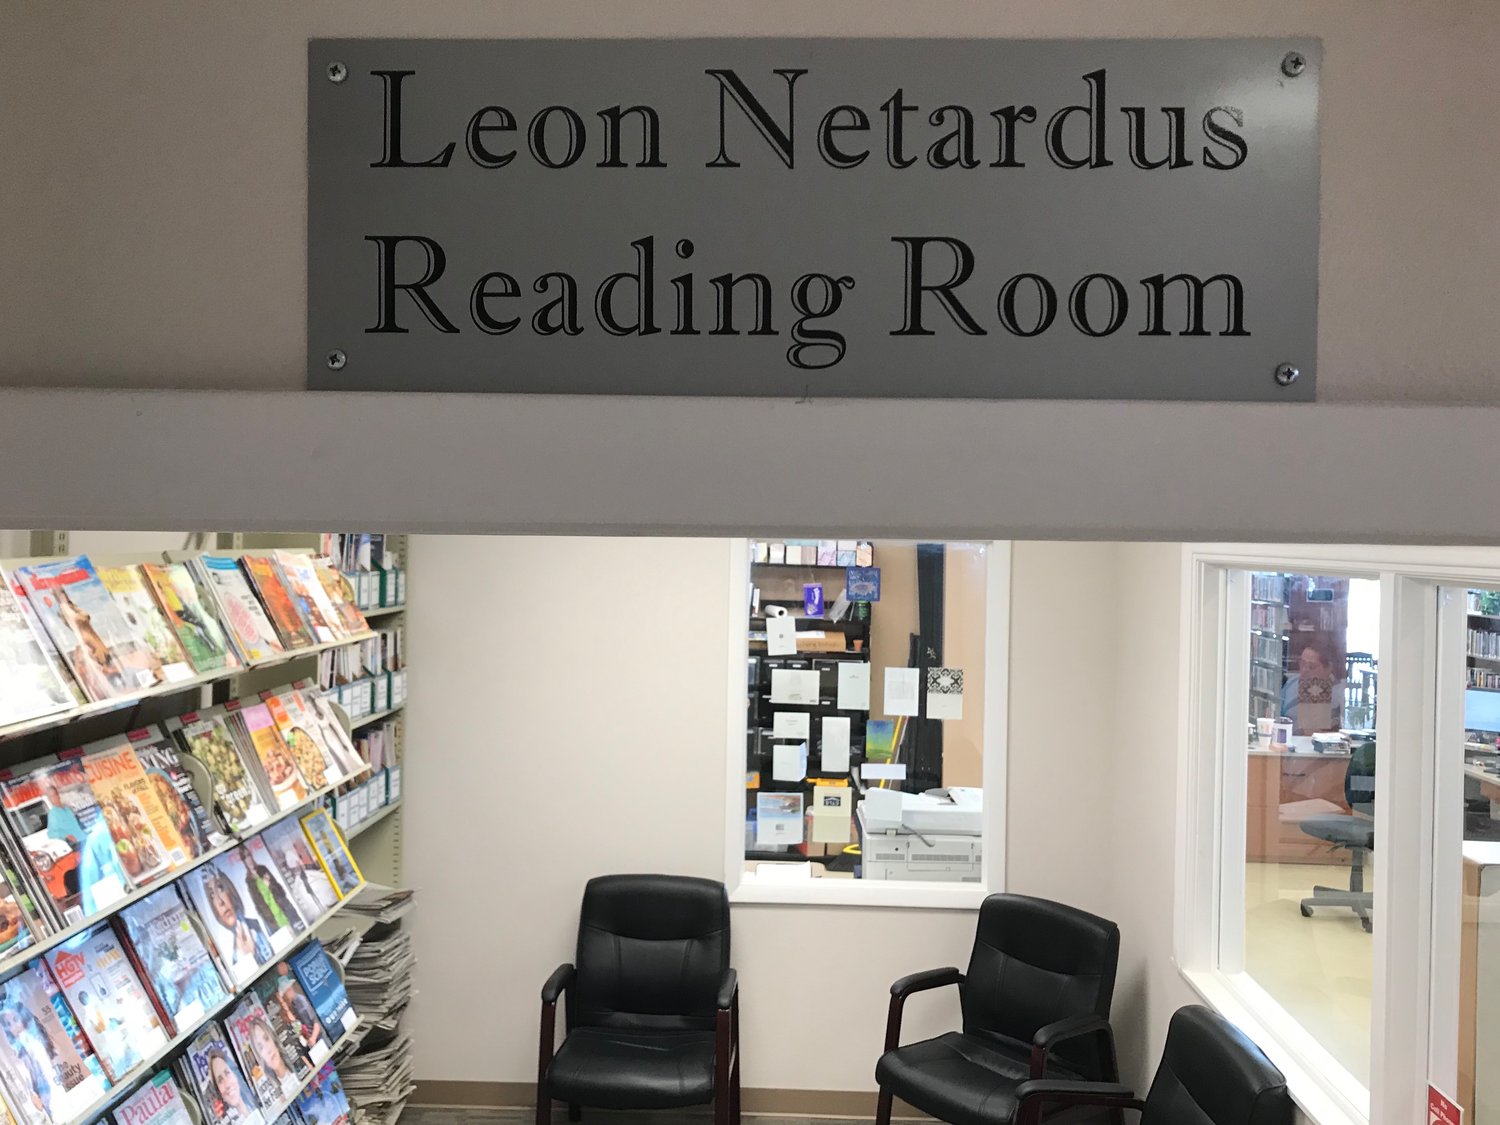 The Robert Lee Brothers Jr. Memorial Library named its magazine room the Leon Netardus Reading Room in honor of Leon’s 90th birthday.